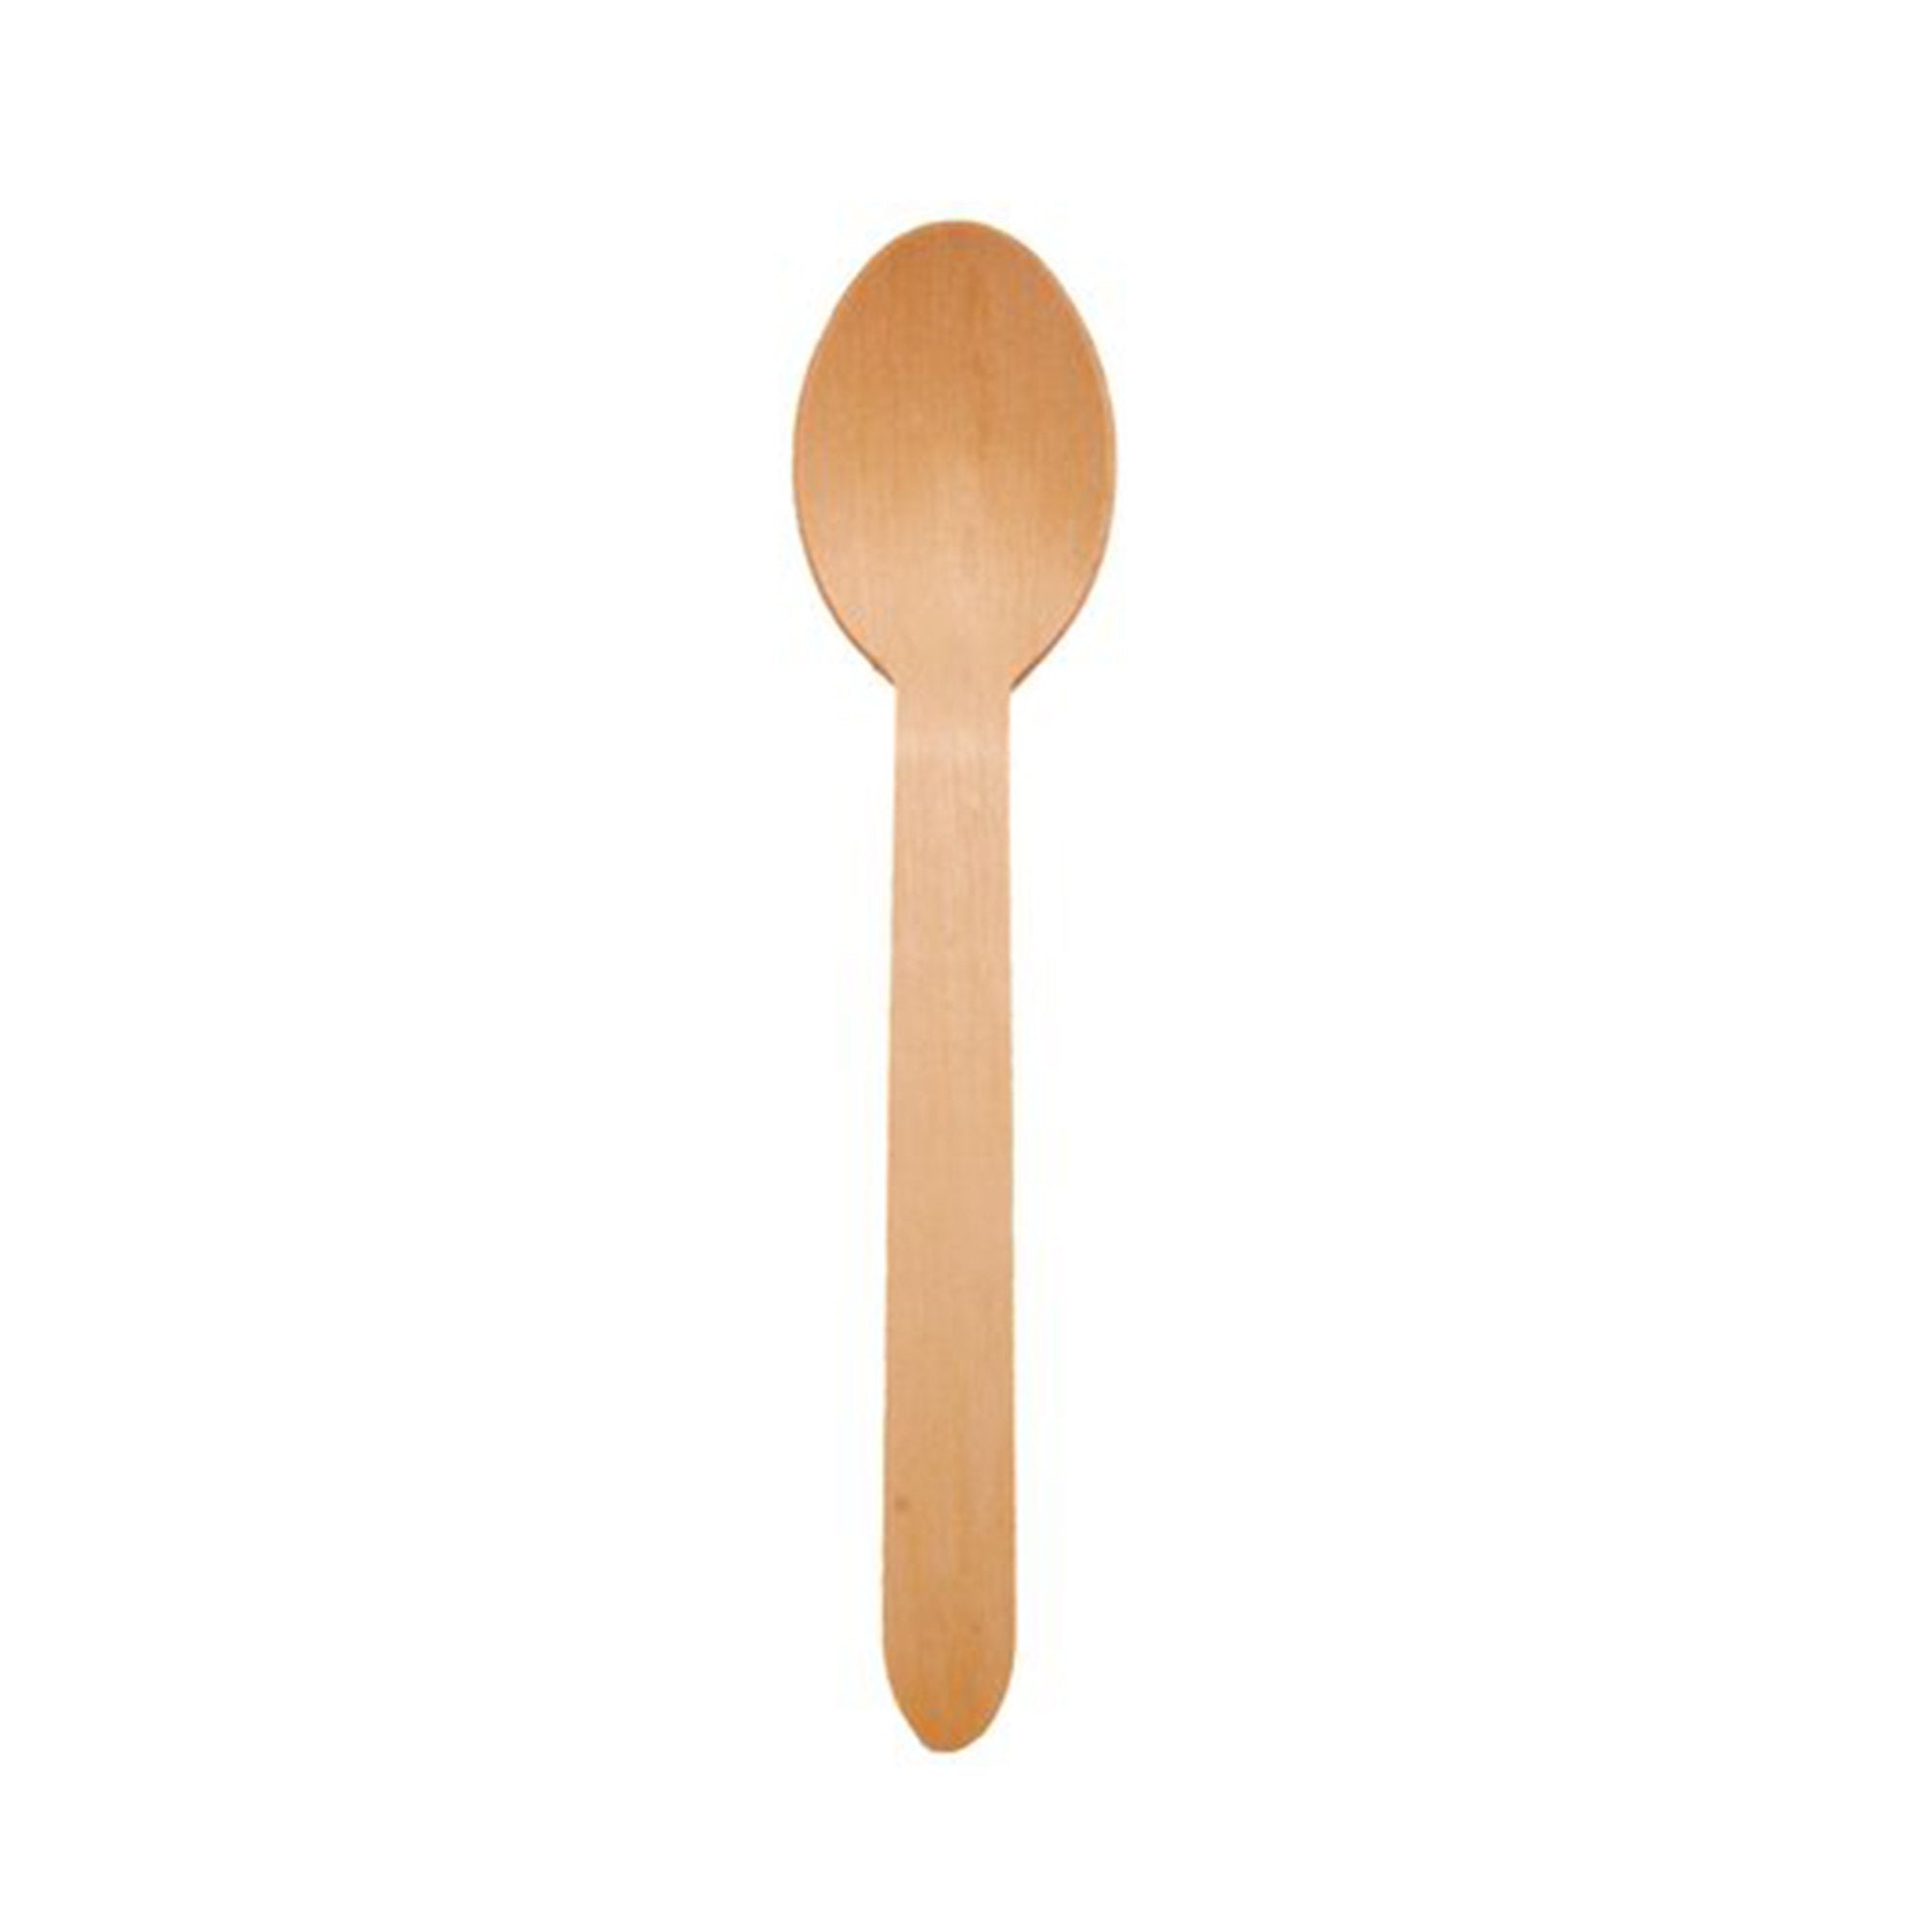 Eco-gecko disposable wooden spoon. image of single spoon.